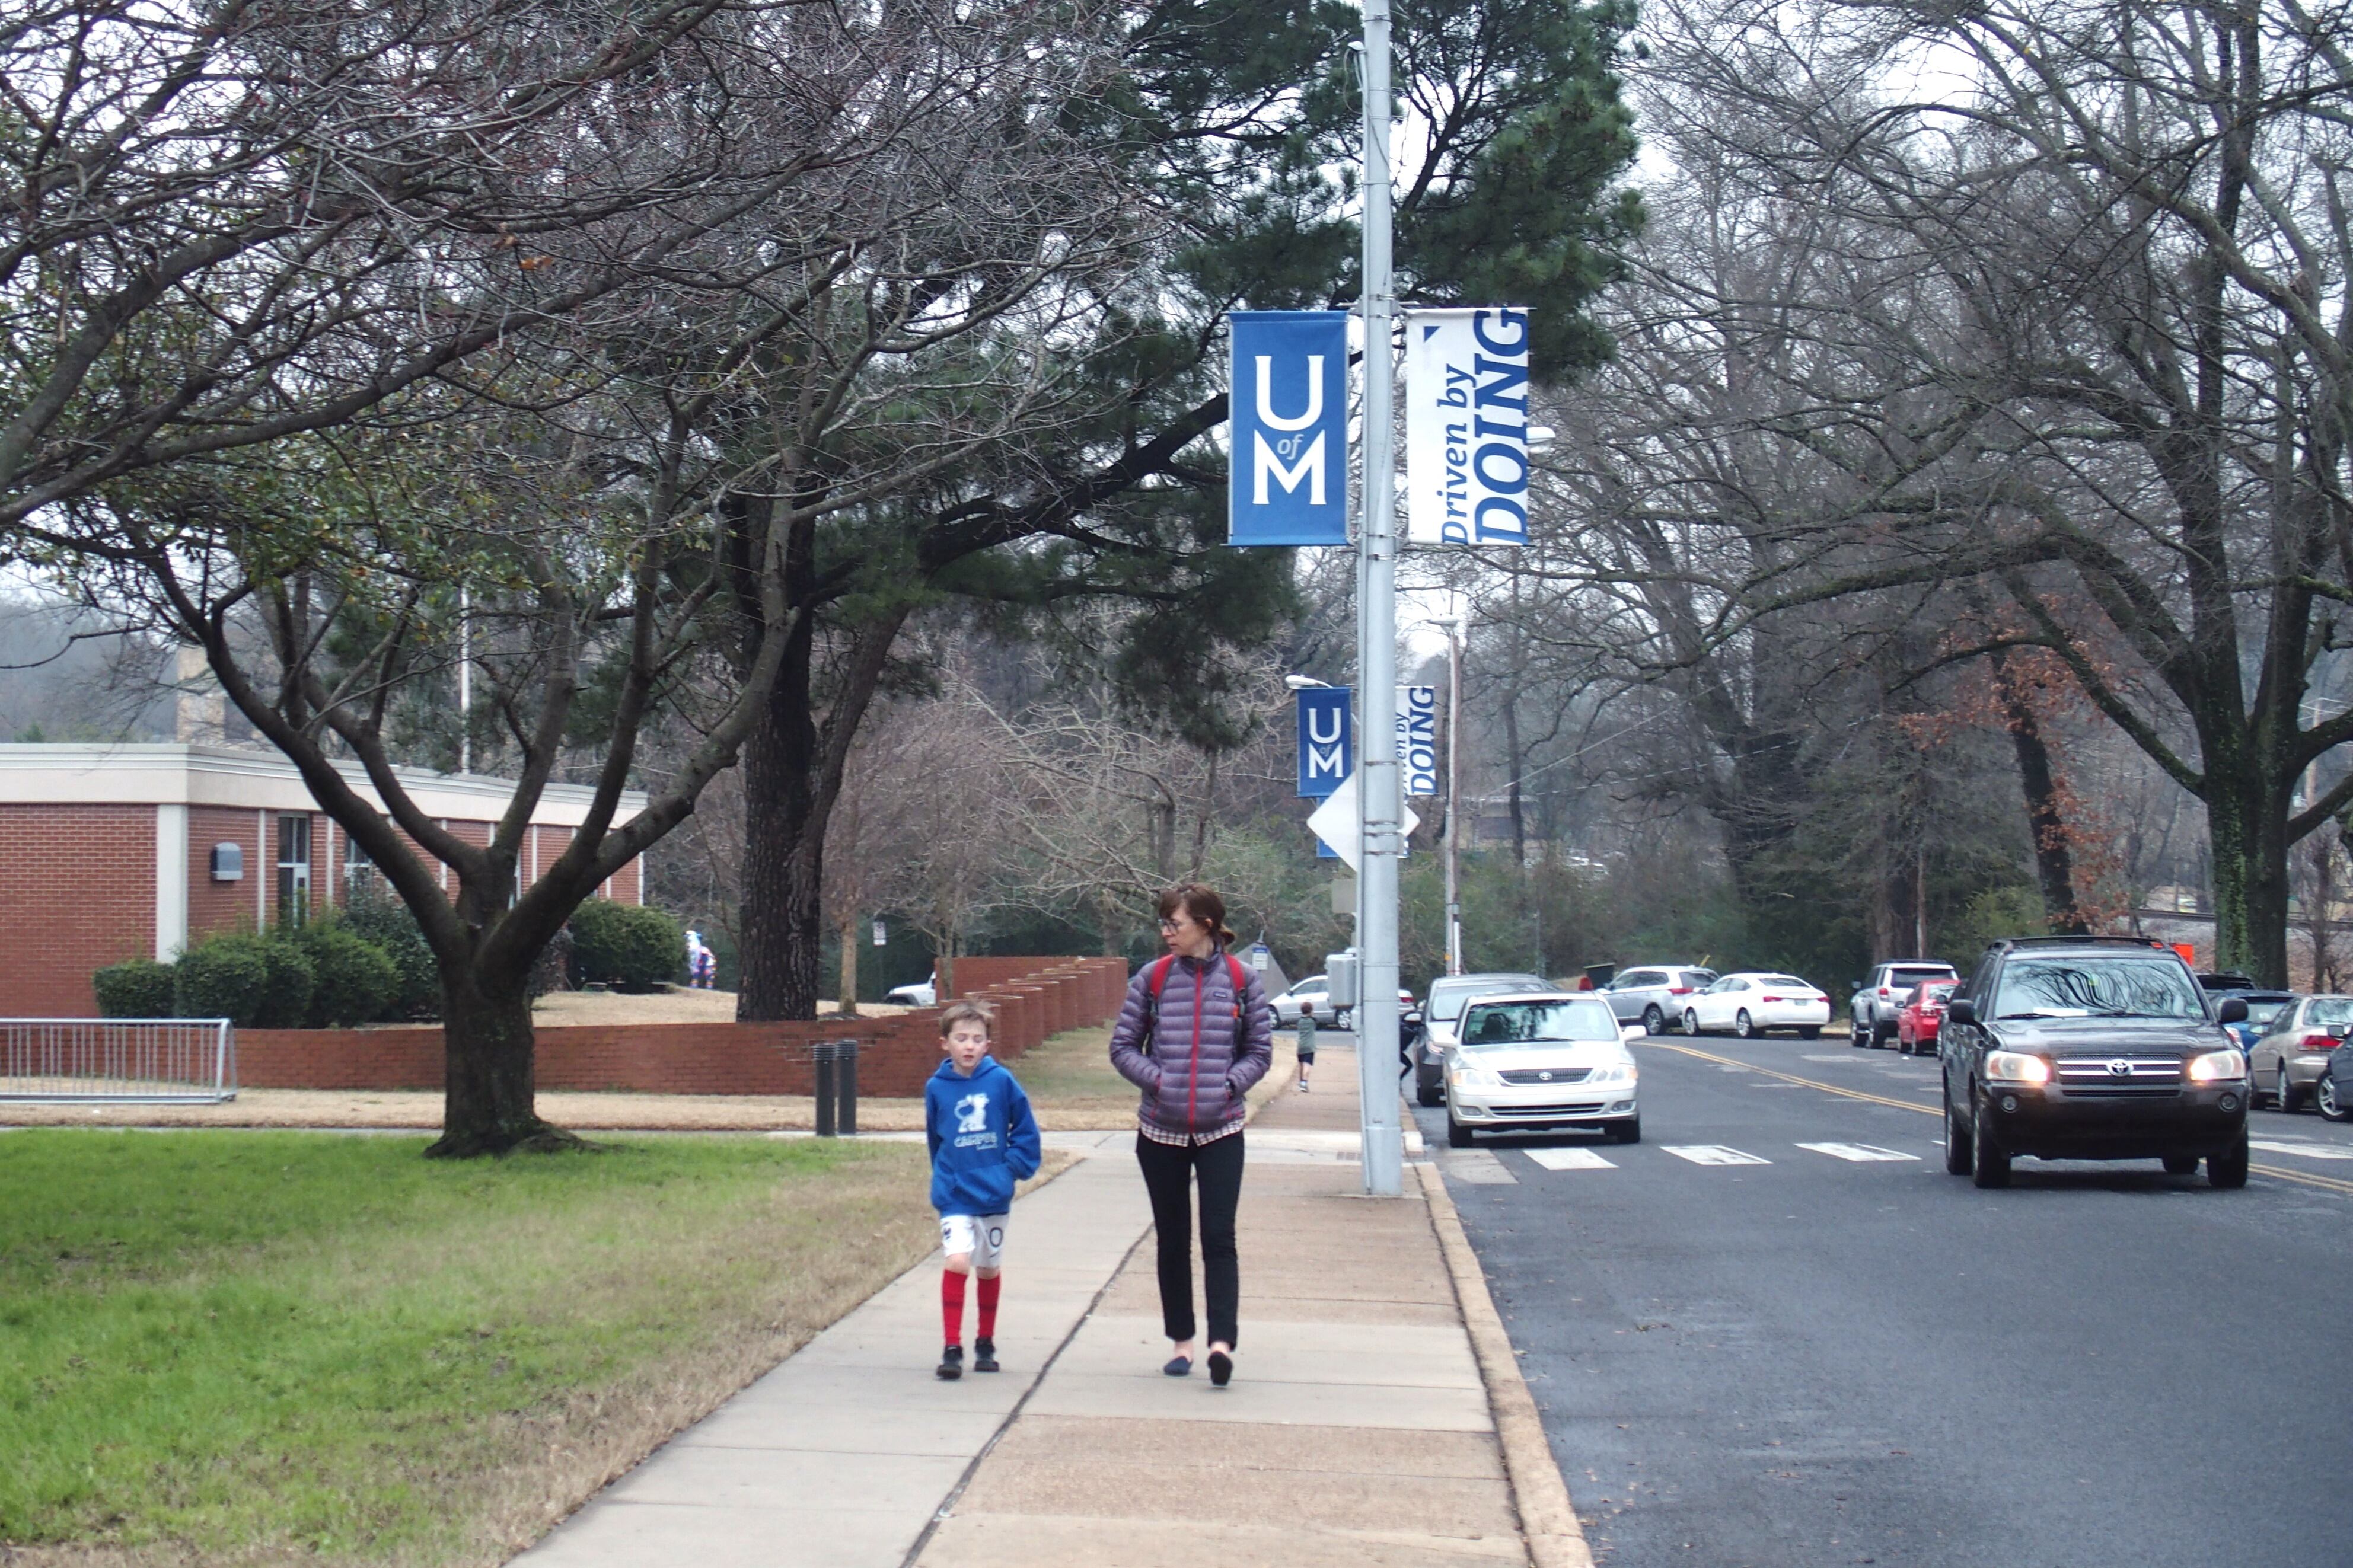 A young student walks with another person outside a school next to a road with cars driving along.